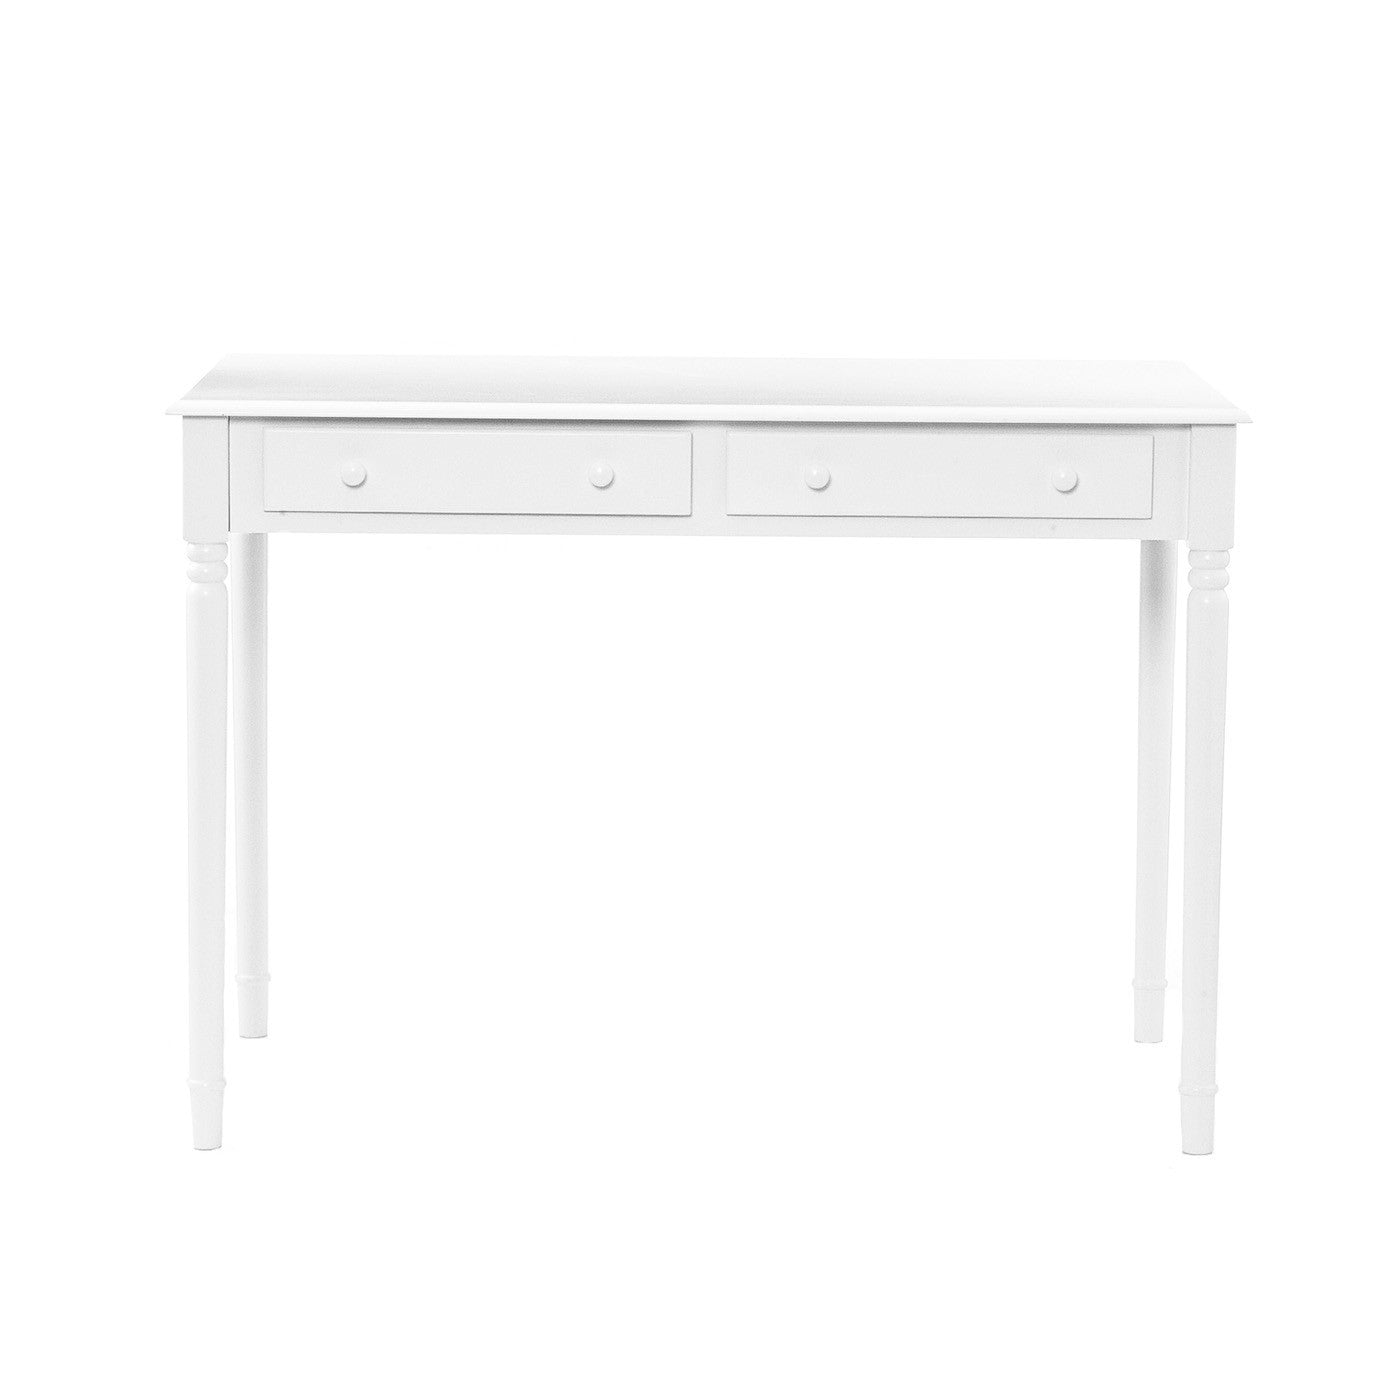 43" White Solid Wood Writing Desk With Two Drawers